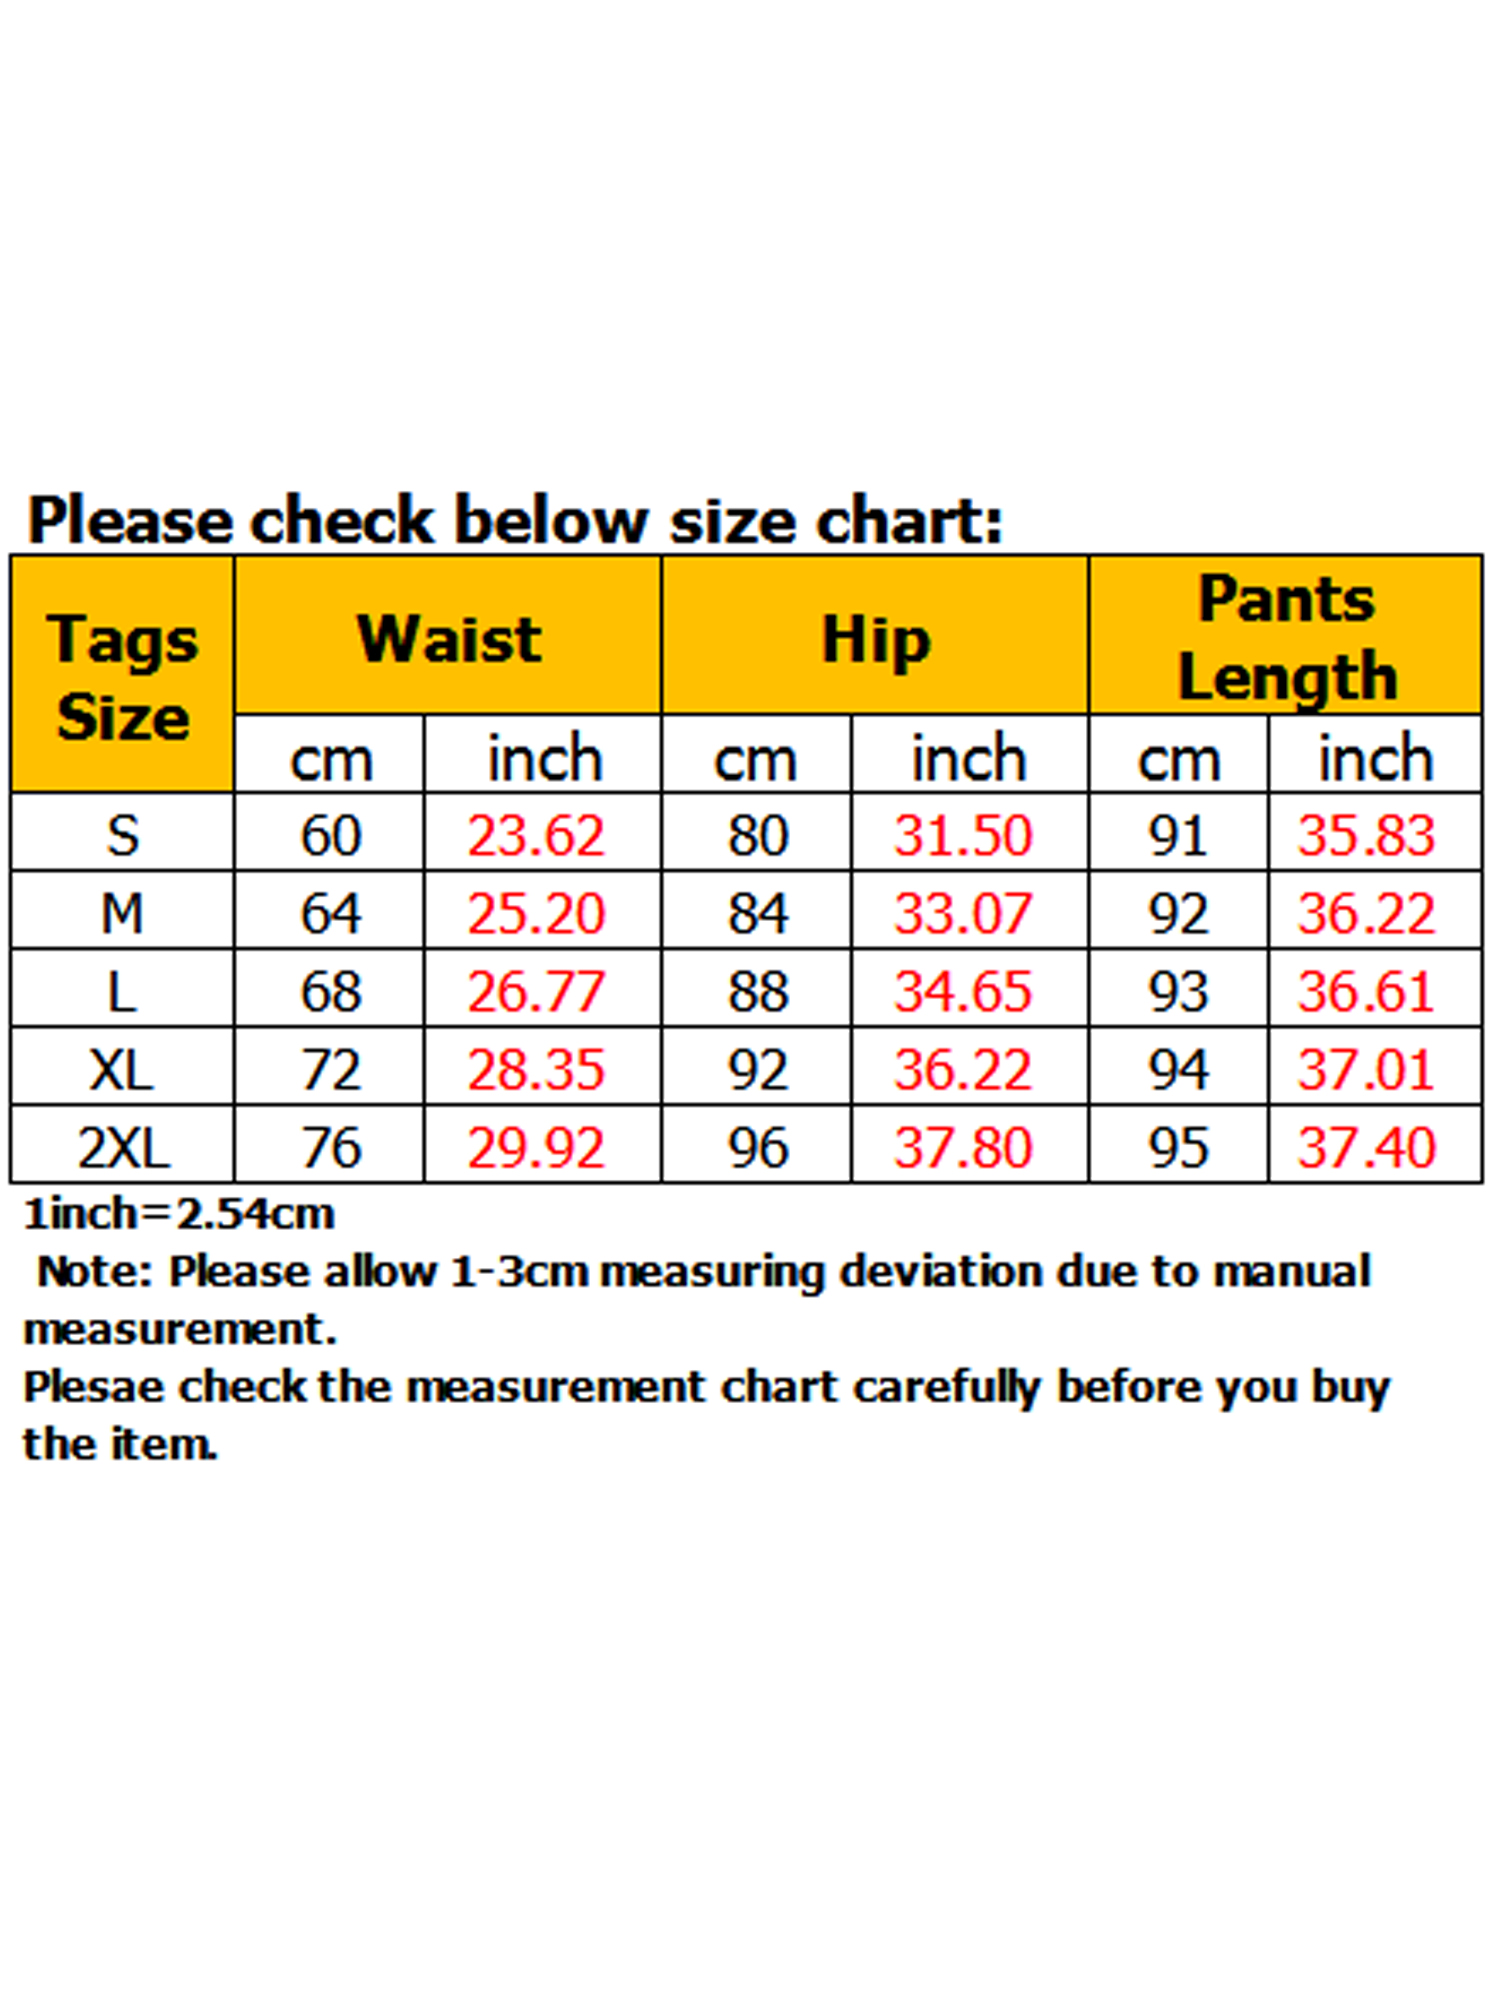 Ladies Skinny Jeans Stretch Jeans High Waisted Leggings Denim Print Distressed Jeans For Women Seamless Full Length Pencil Pants - image 2 of 2